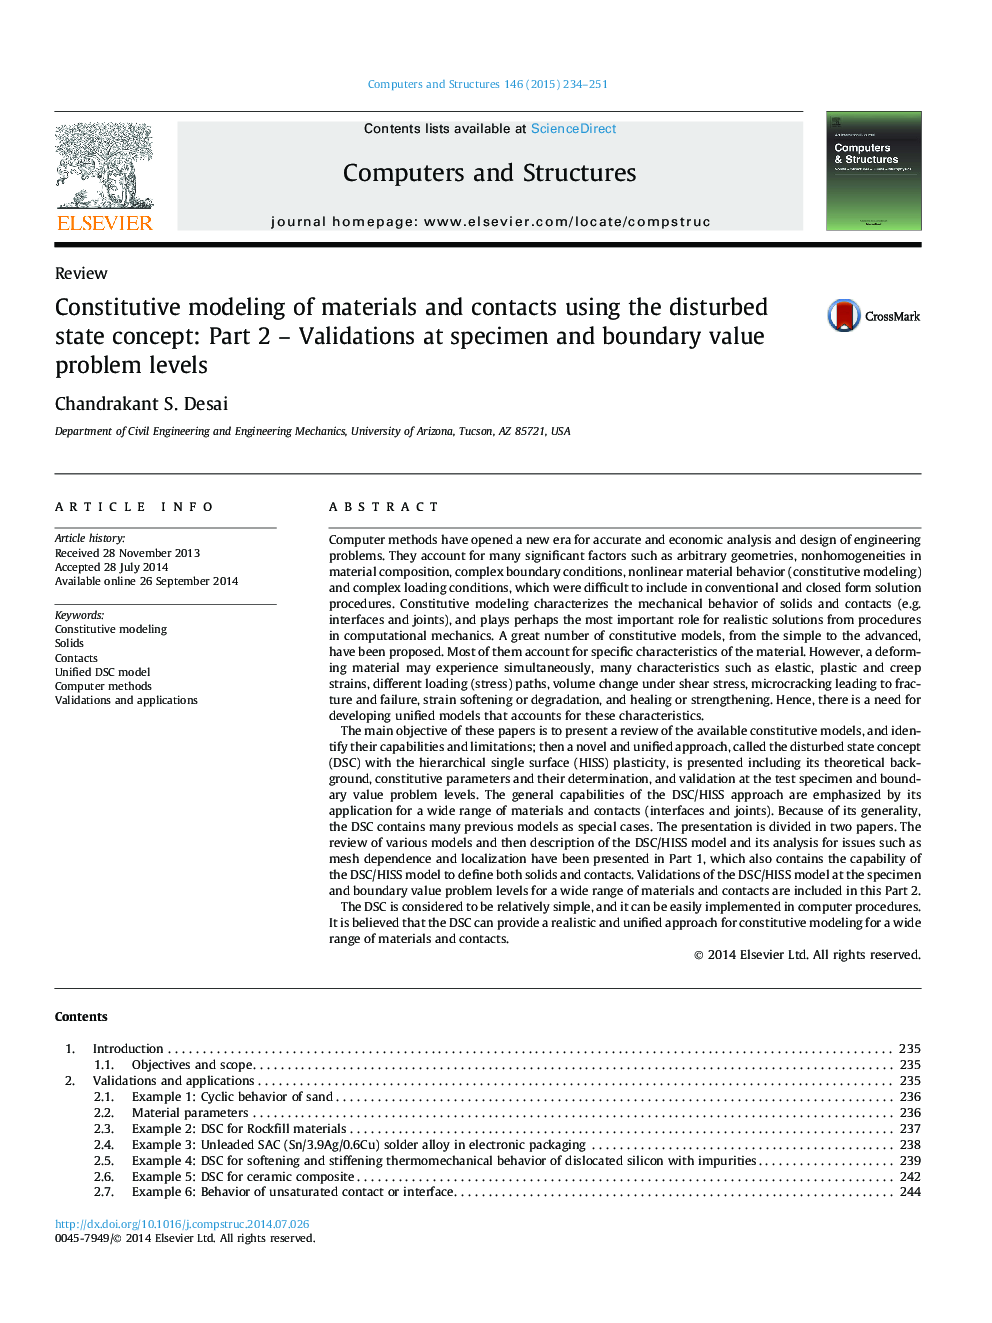 Constitutive modeling of materials and contacts using the disturbed state concept: Part 2 – Validations at specimen and boundary value problem levels